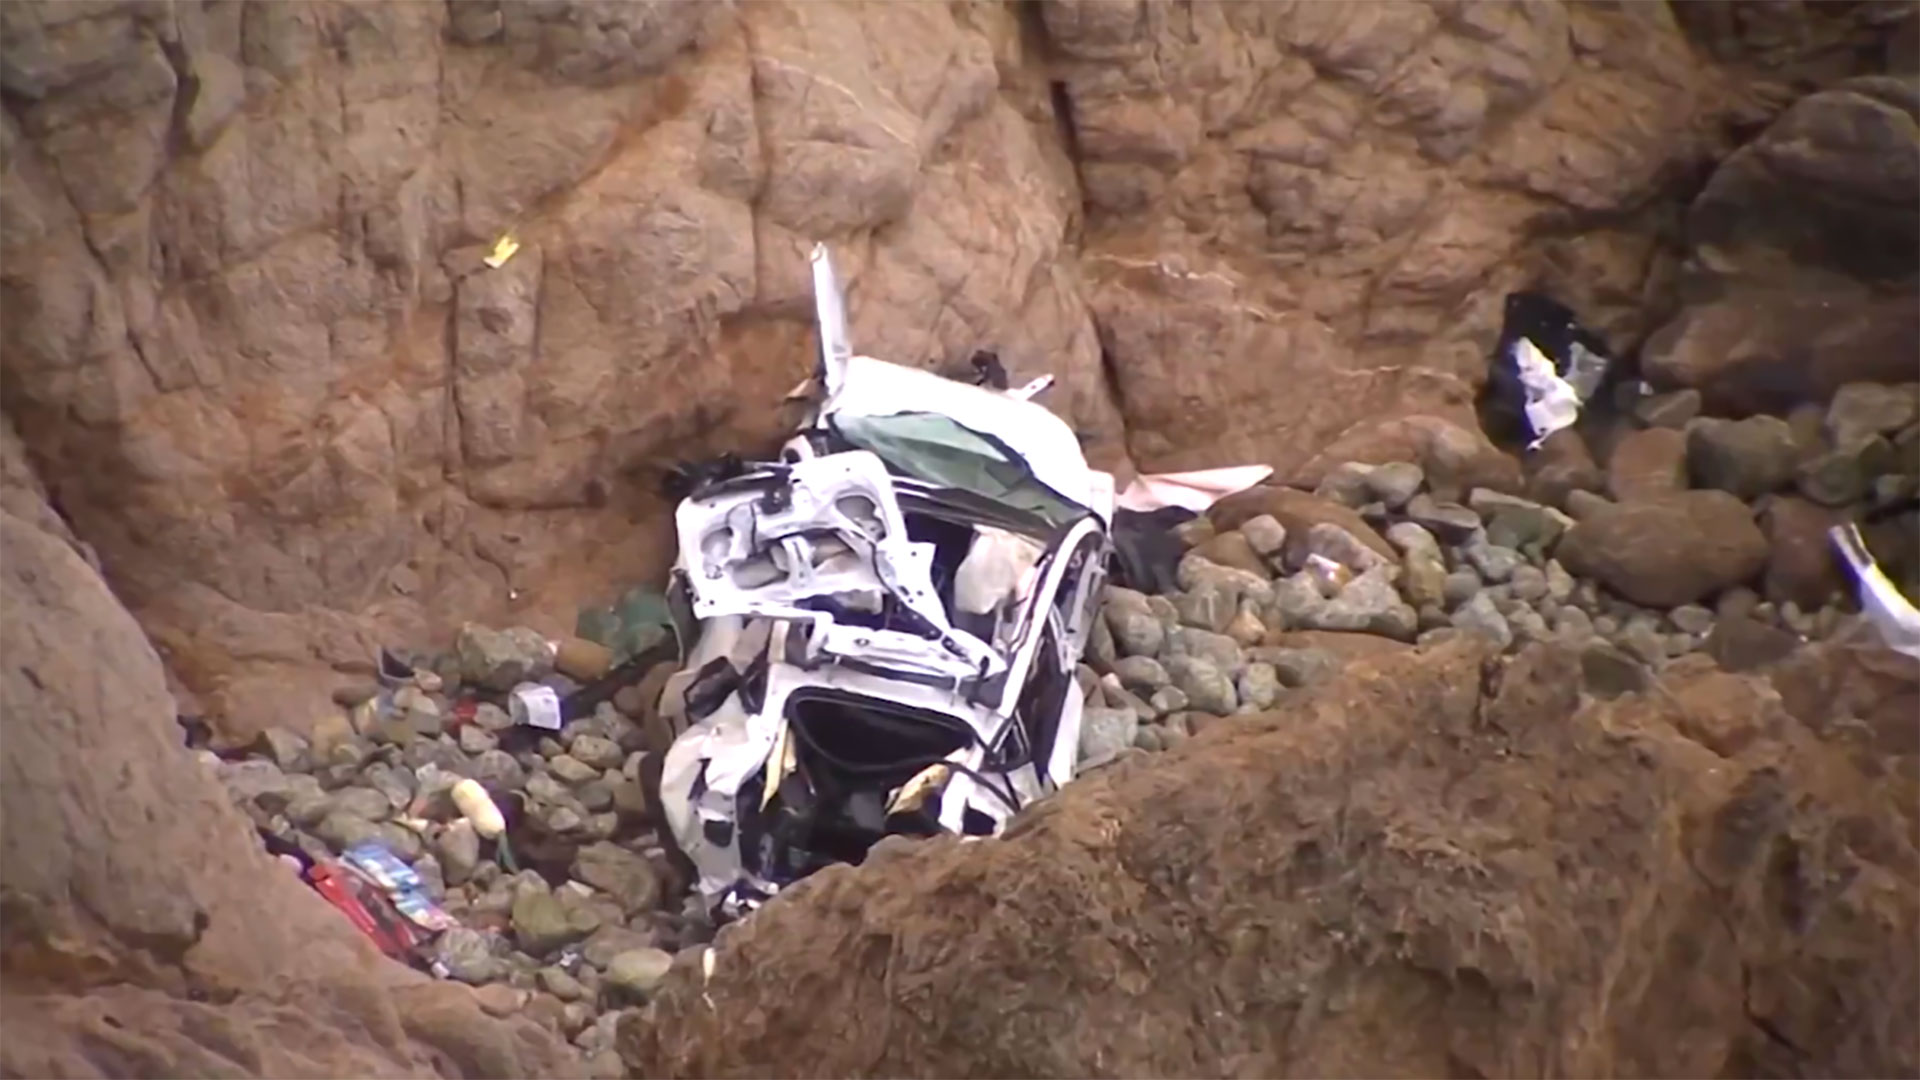 Wife says doctor husband deliberately drove their Tesla off a cliff with  the family inside